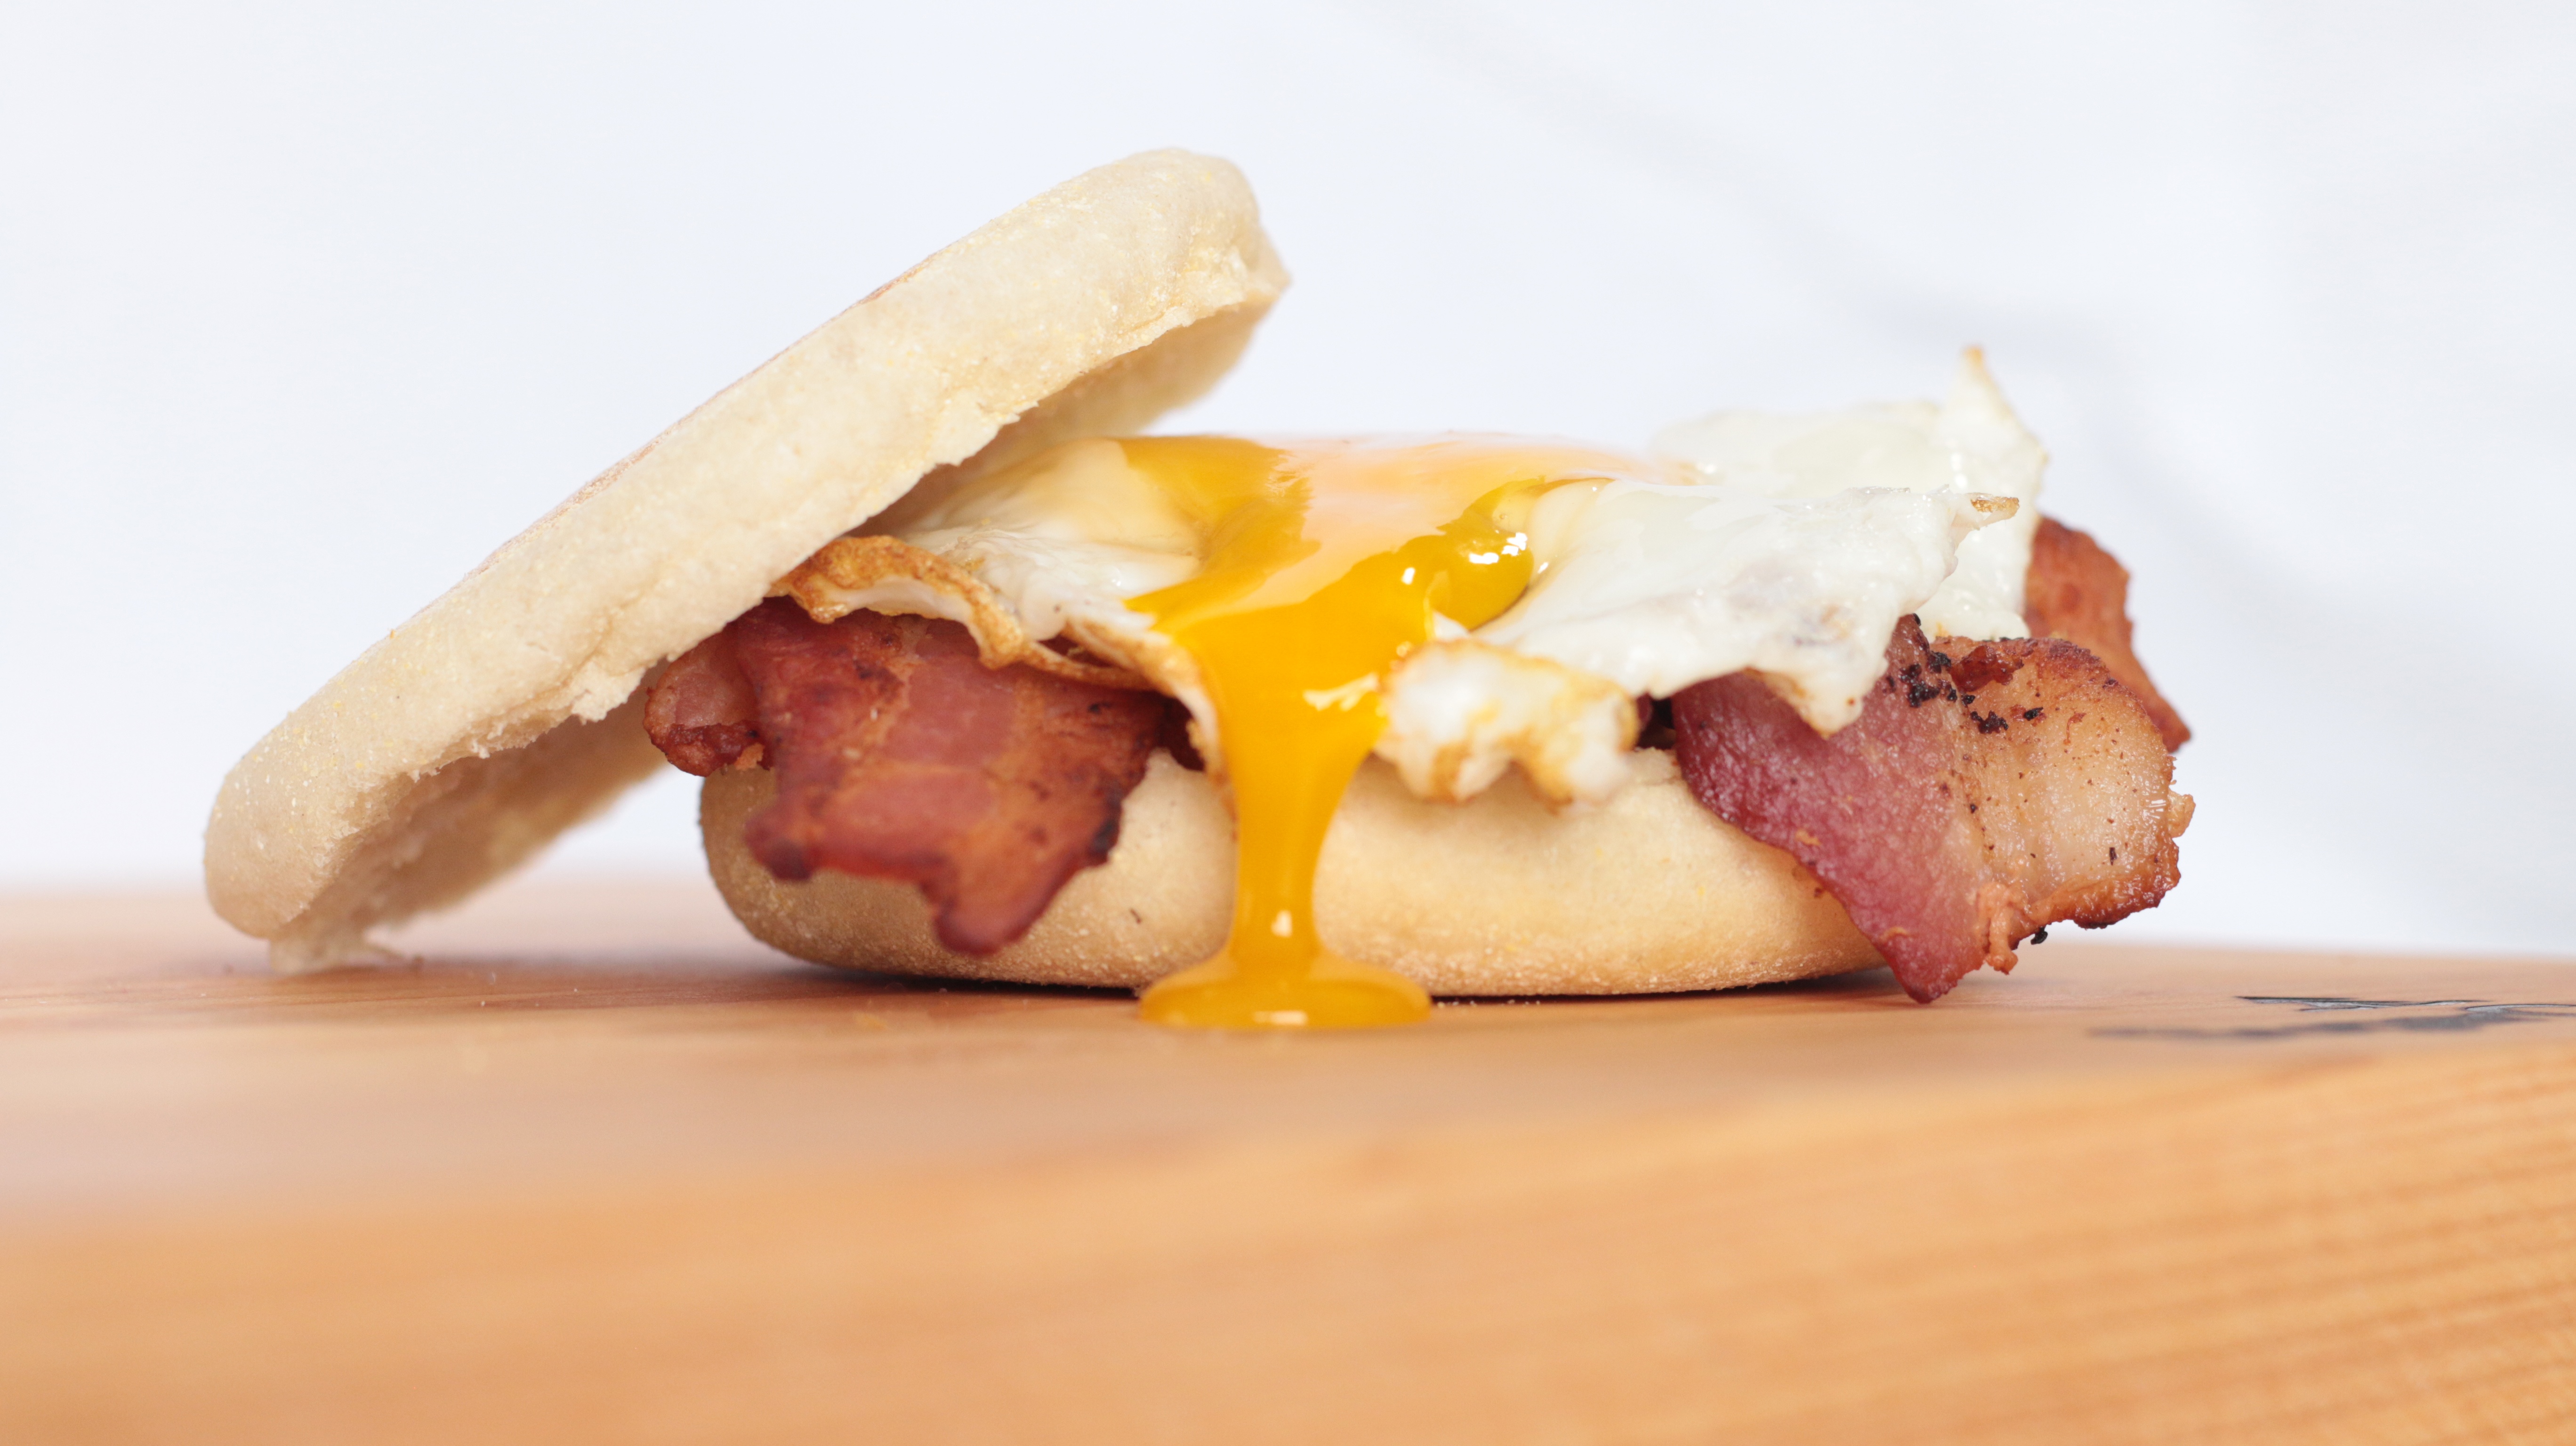 Bacon and egg sandwich on a biscuit with egg yolk running down